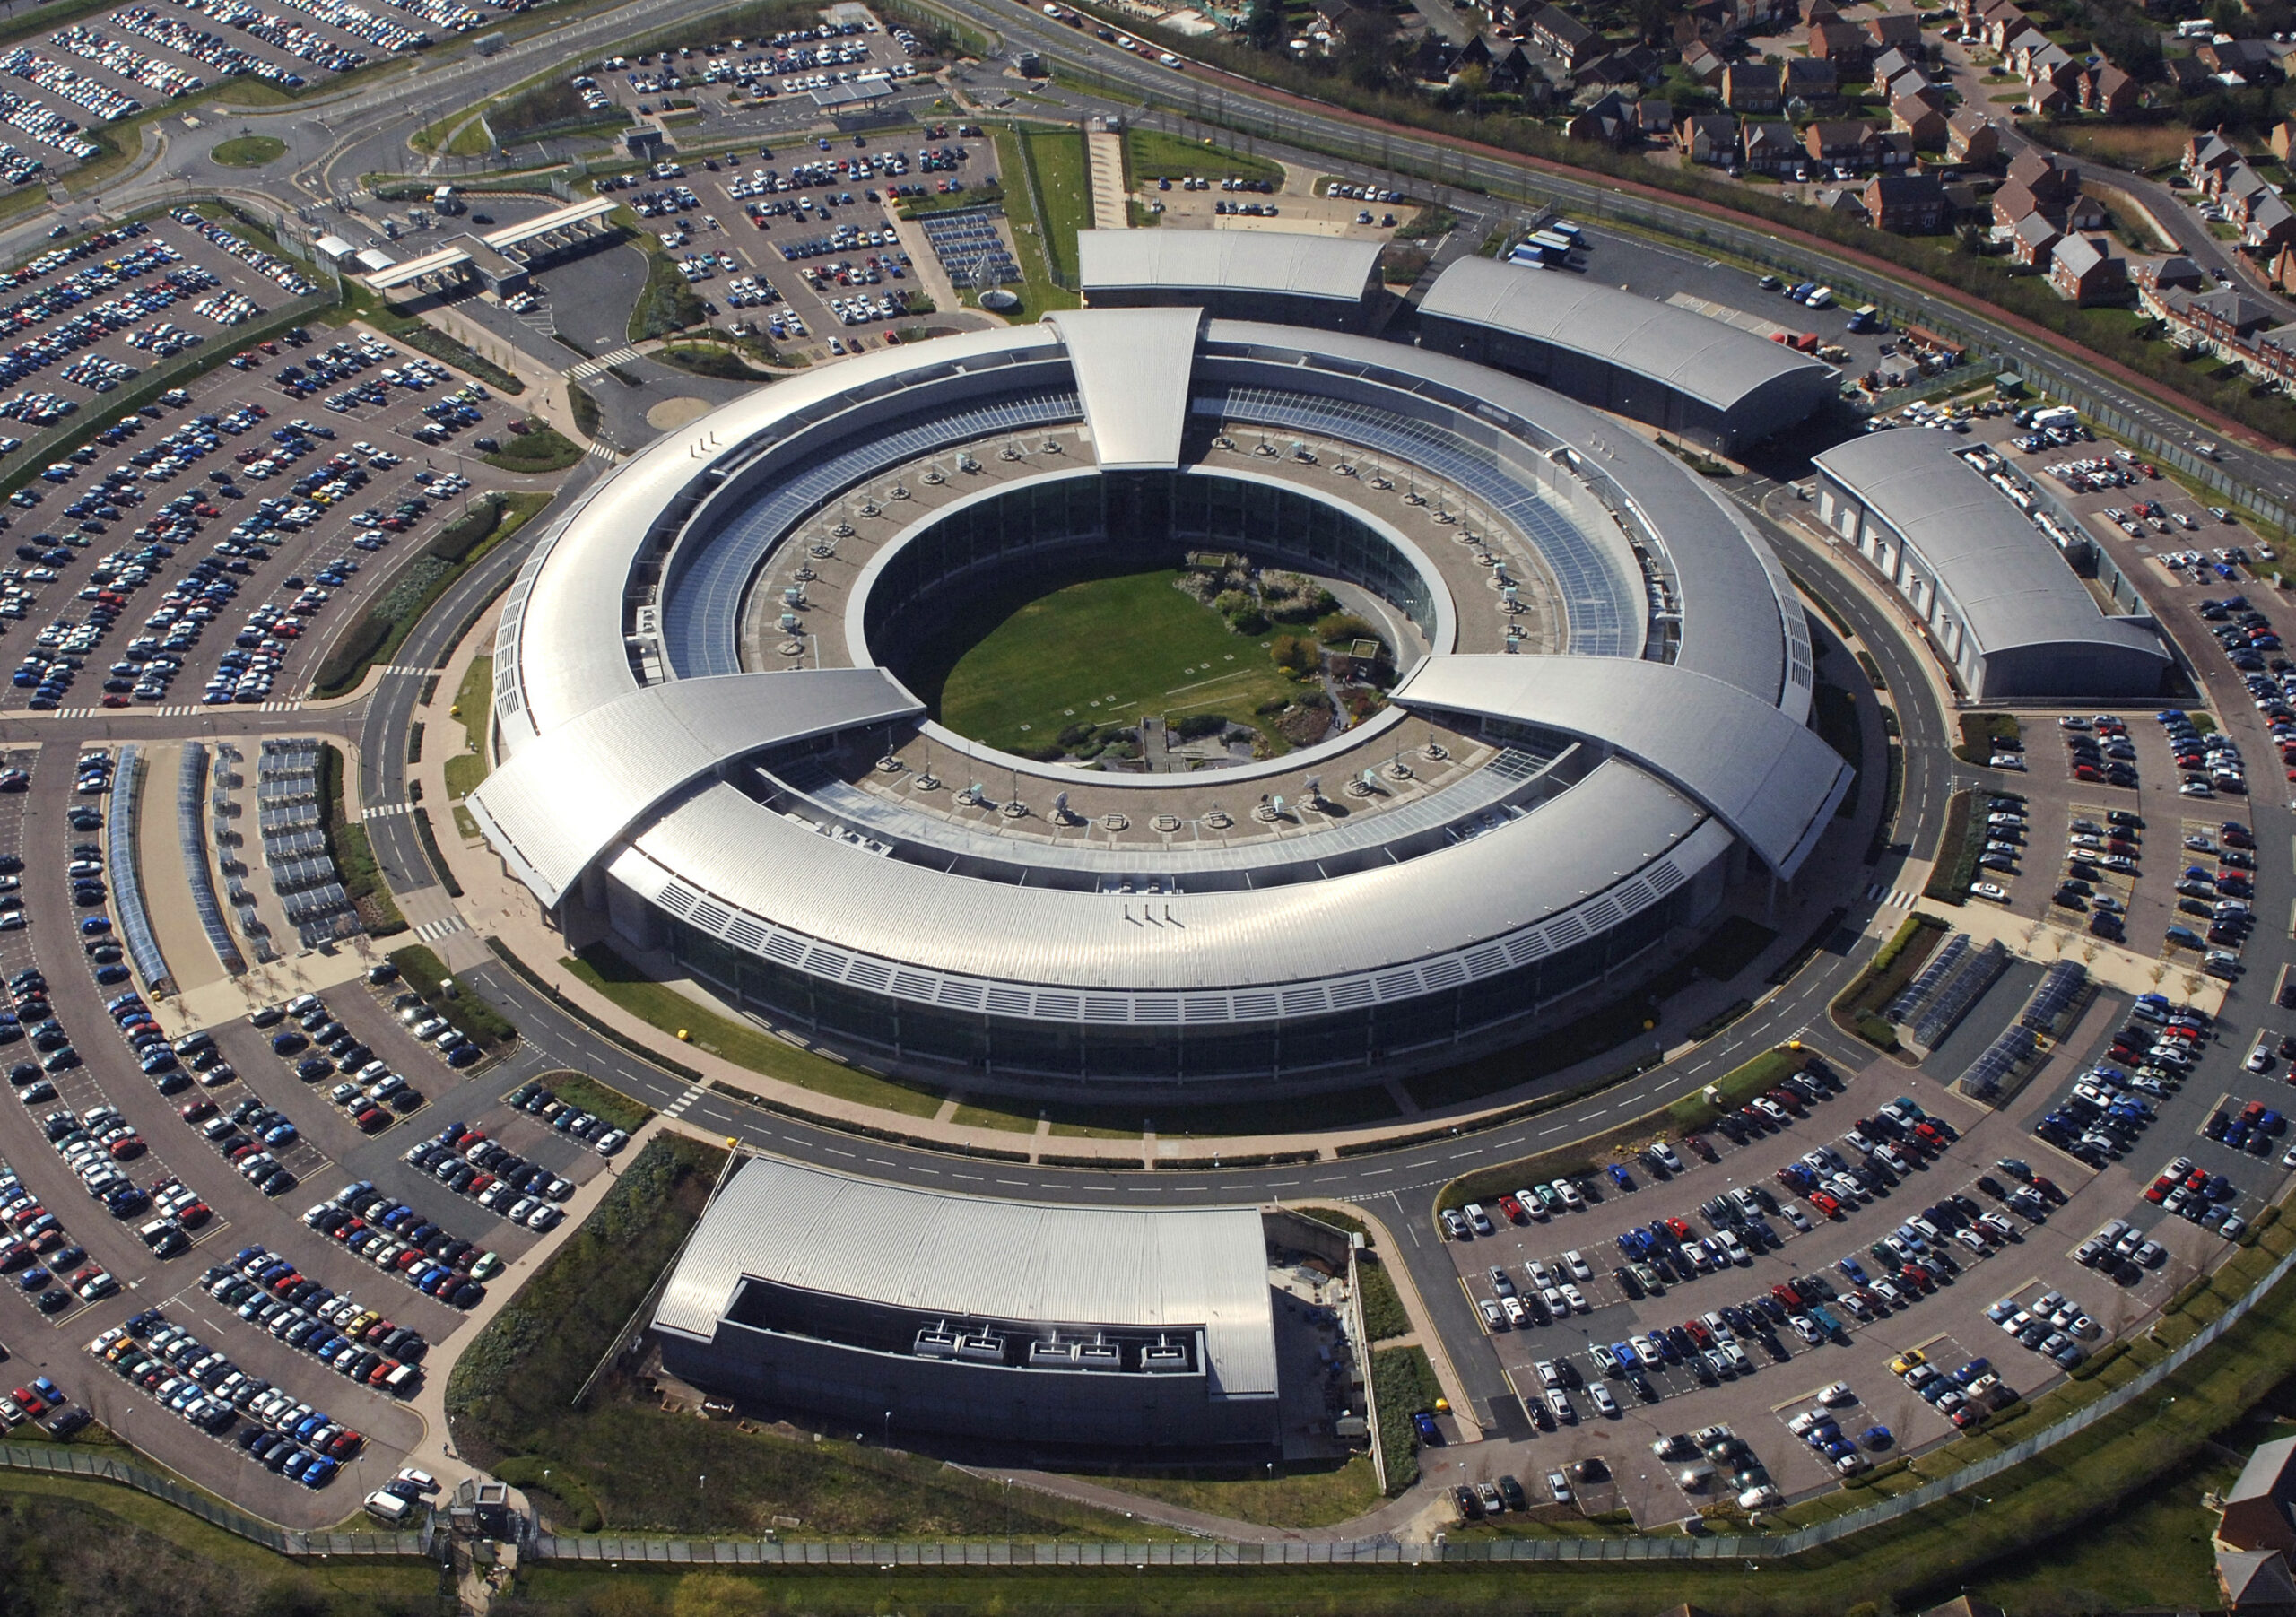 GCHQ seeks tech experts to secretly join boardroom set-up